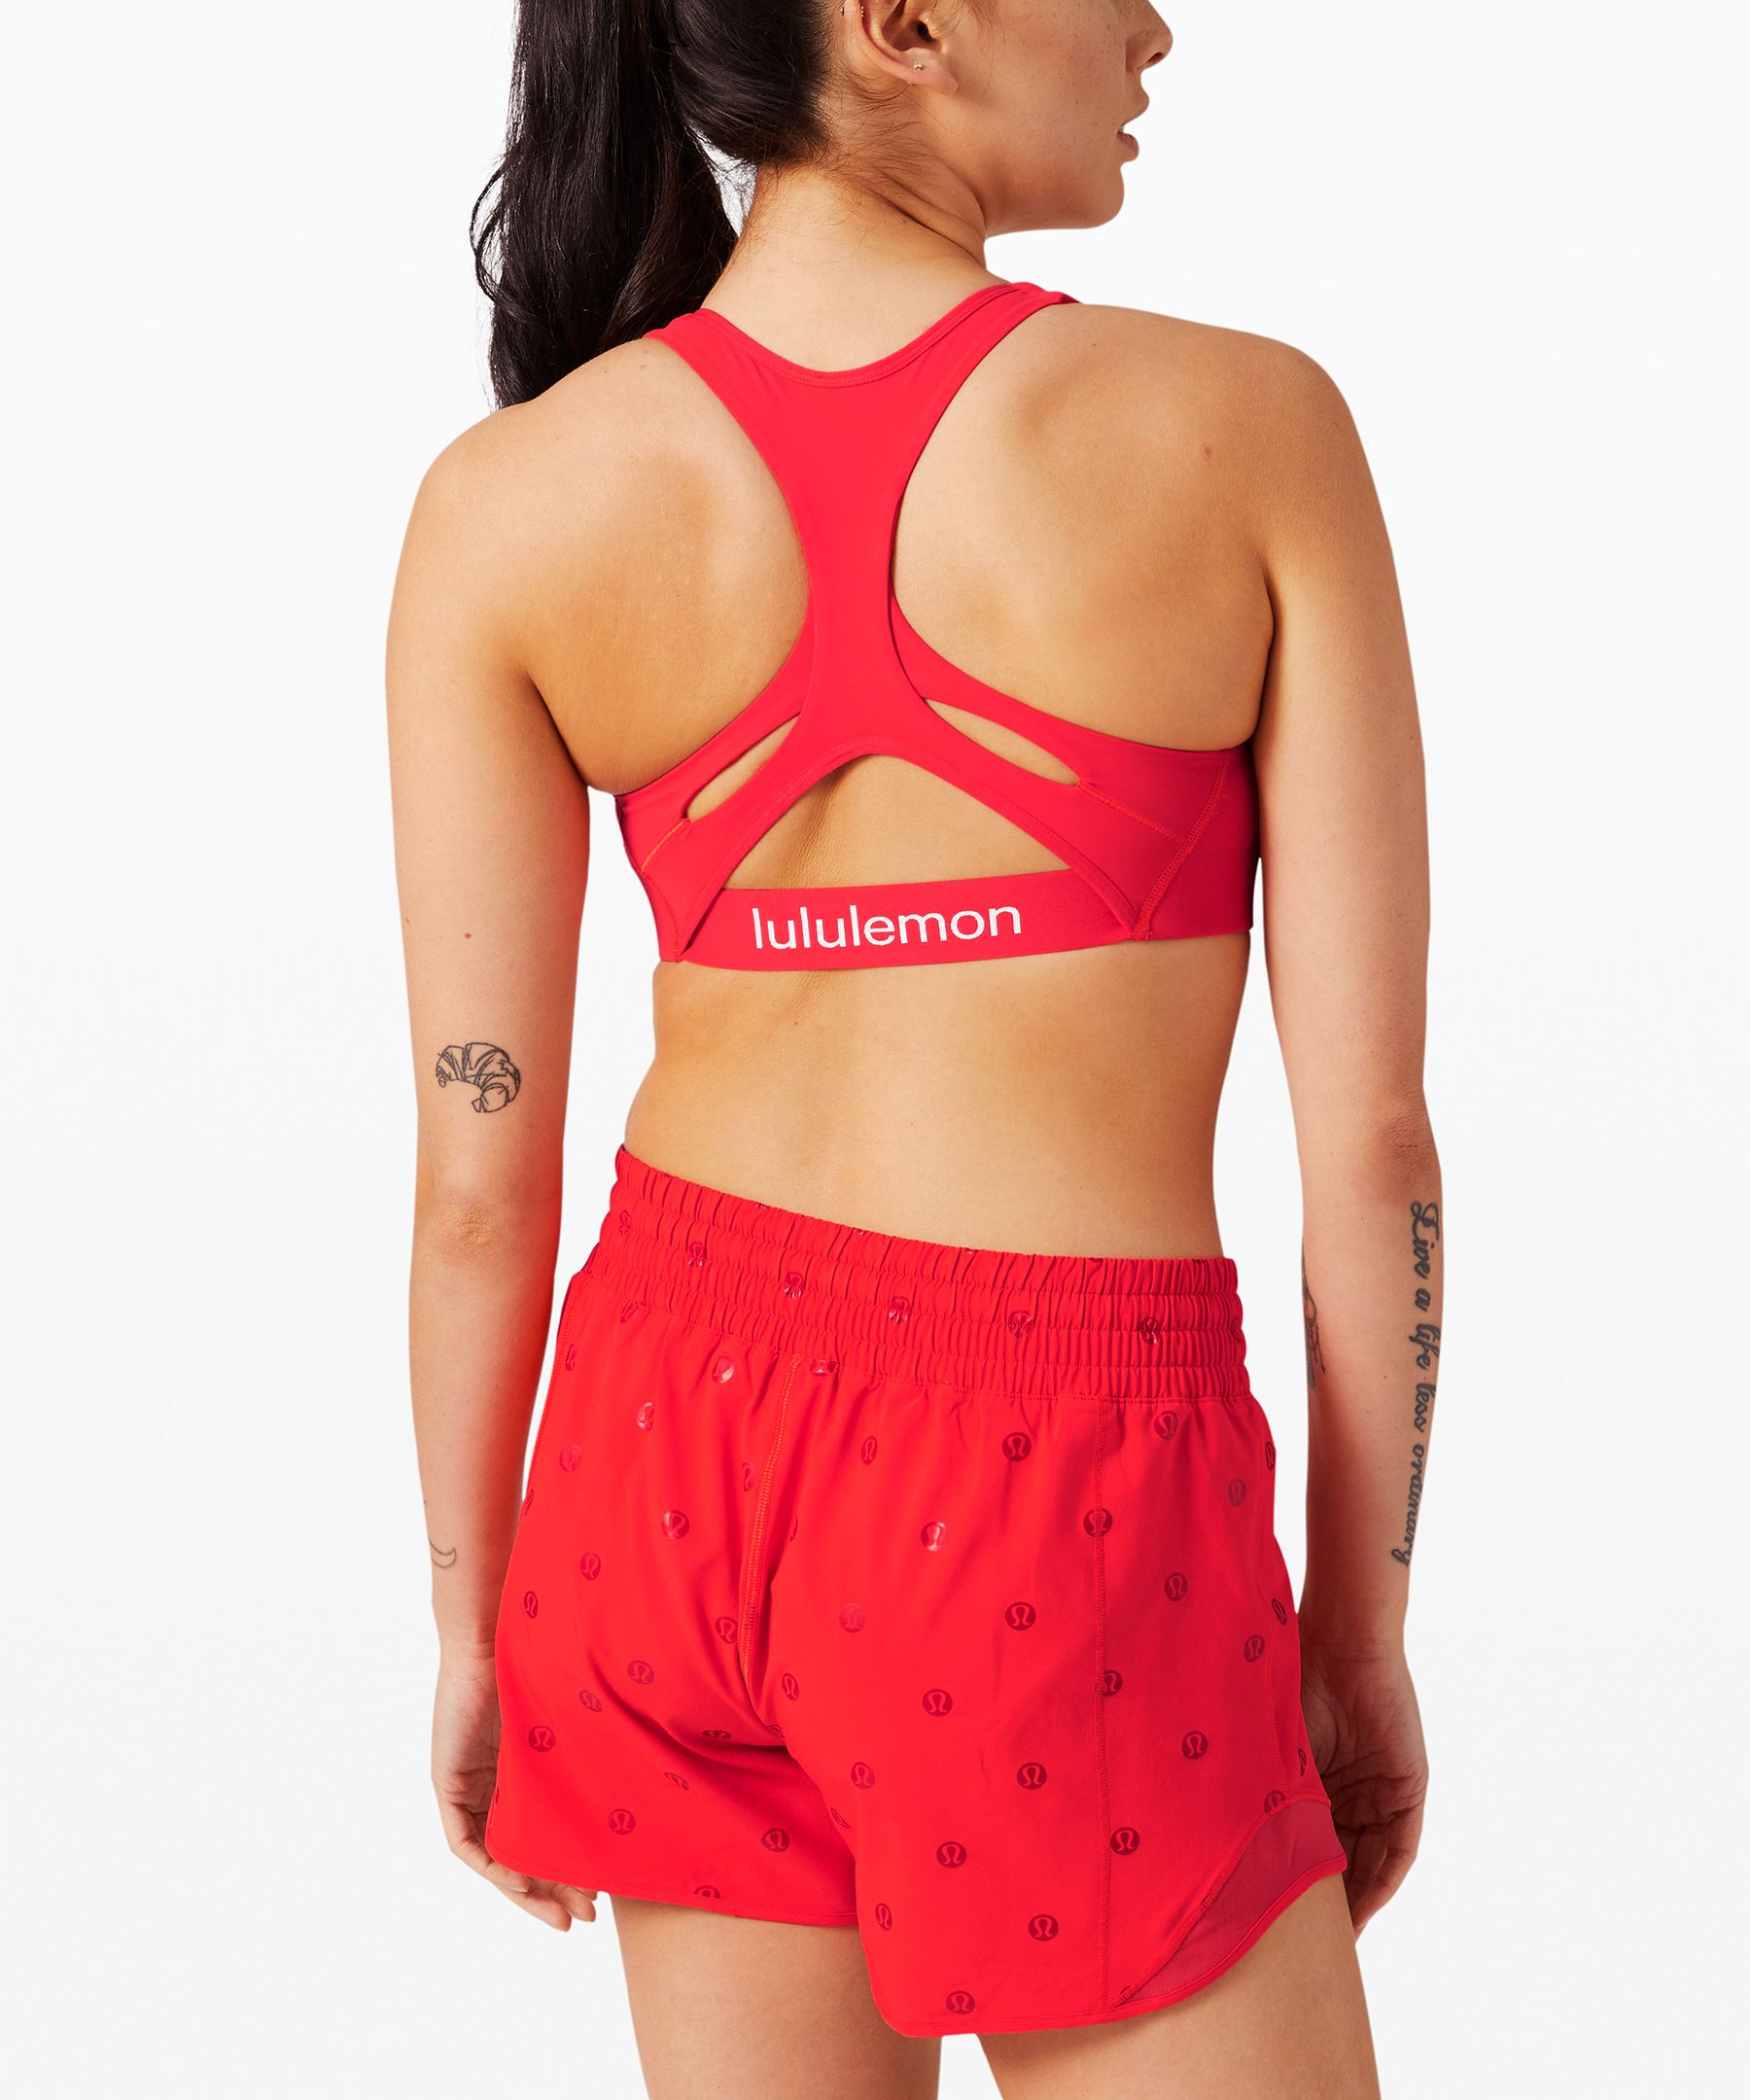 STRONG iD® Tops- Fitness Tops for Women